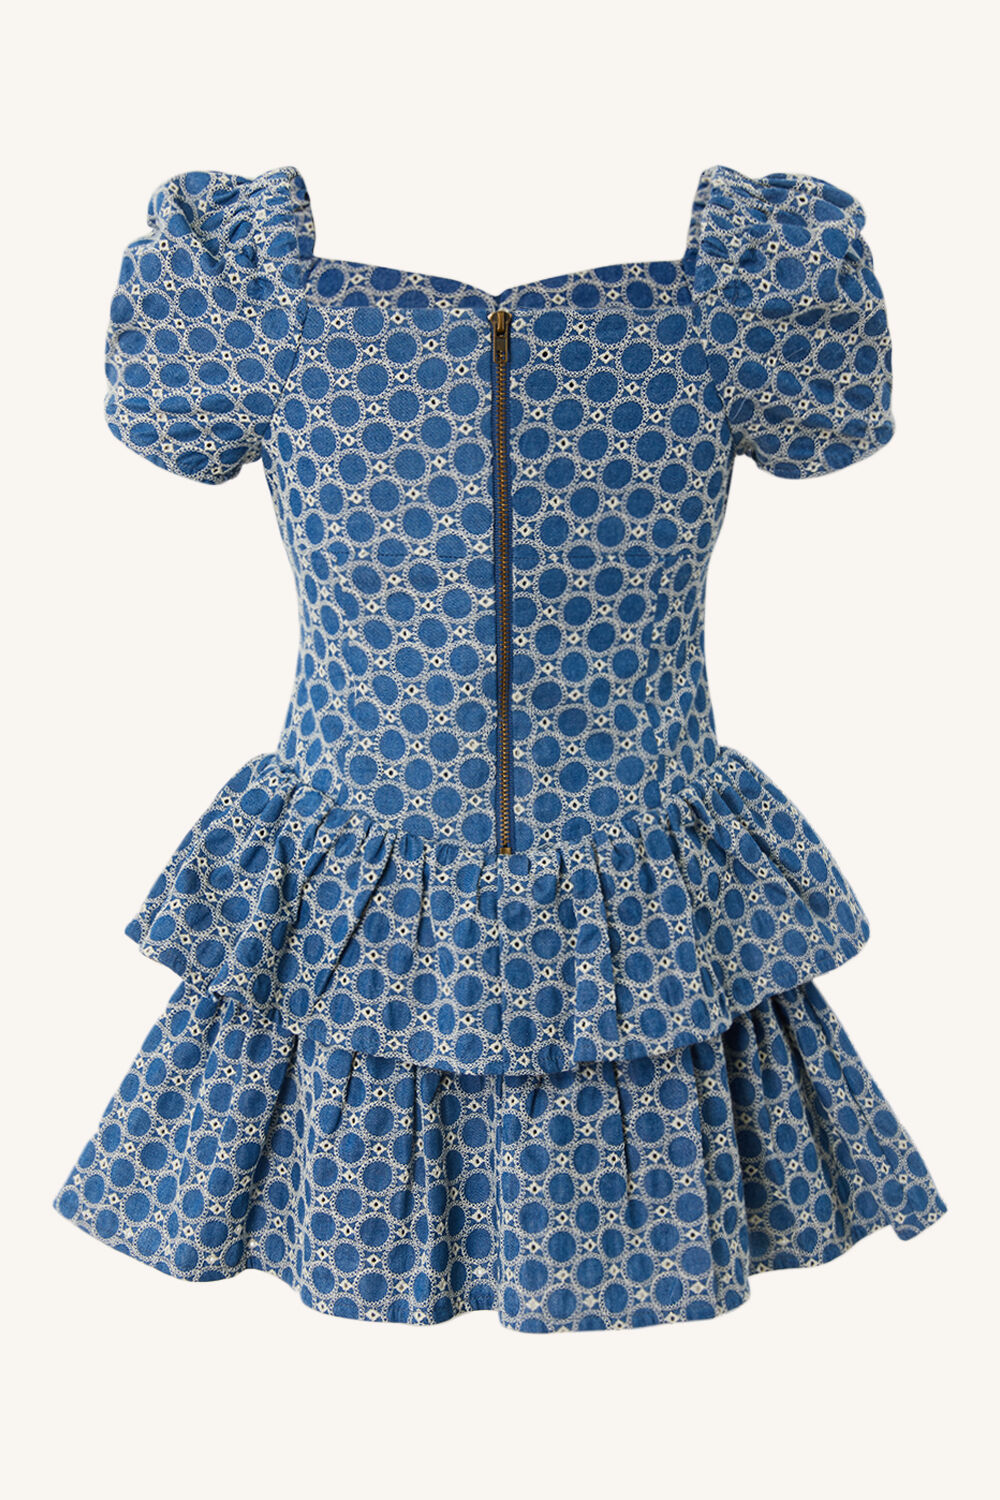 BABY GIRL BRODERIE CORSET DRESS in colour CHAMBRAY BLUE